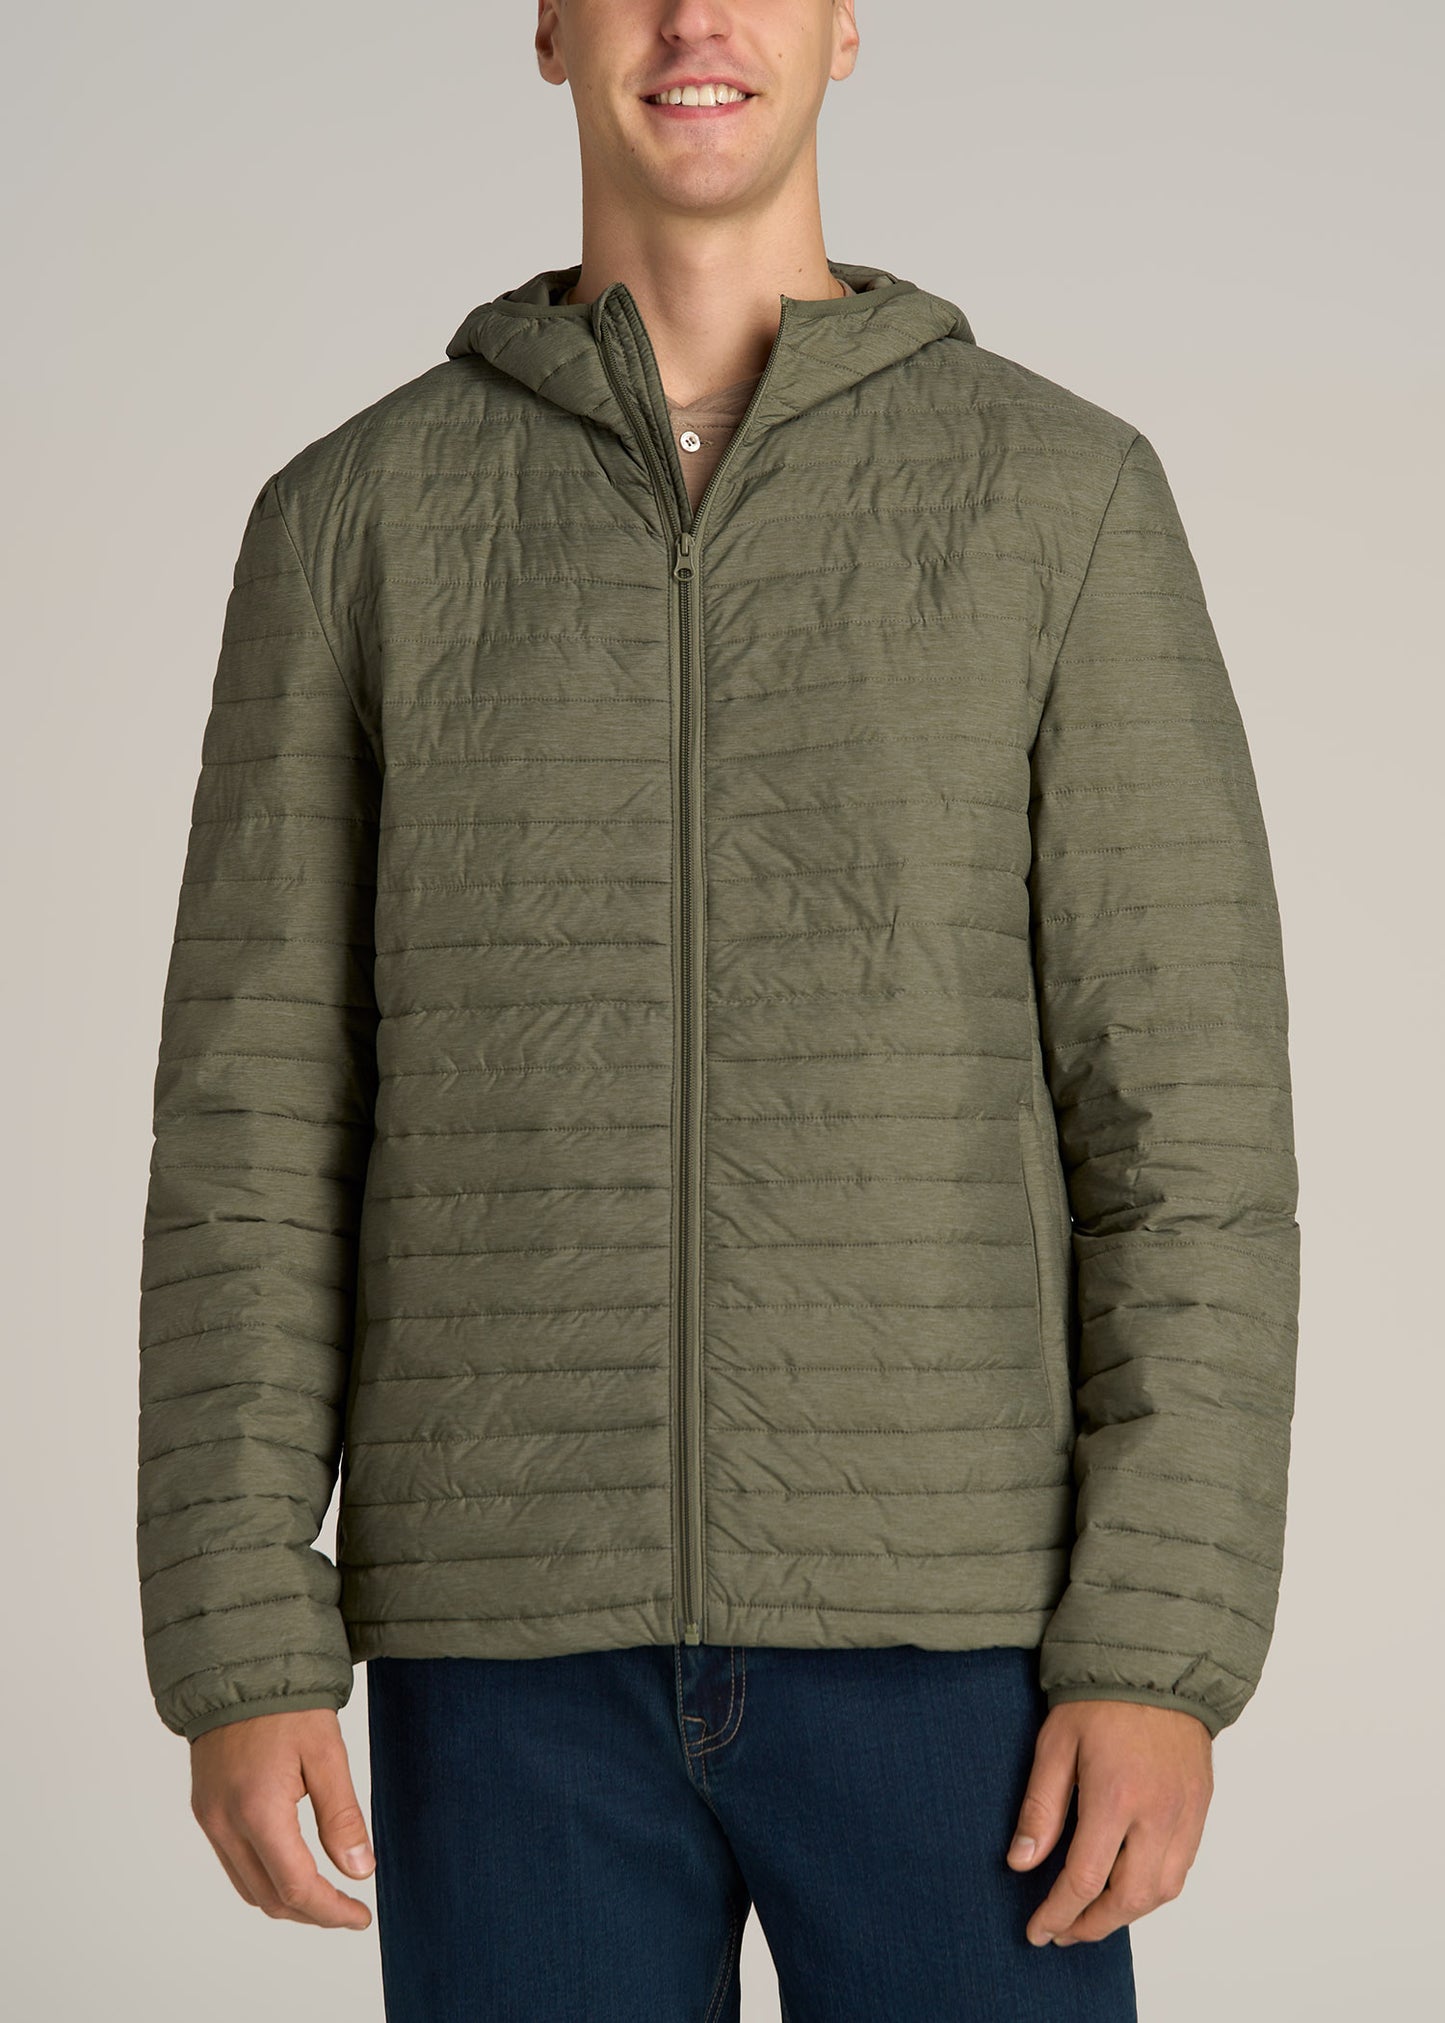 Tall Men's Packable Puffer Jacket in Olive Space Dye